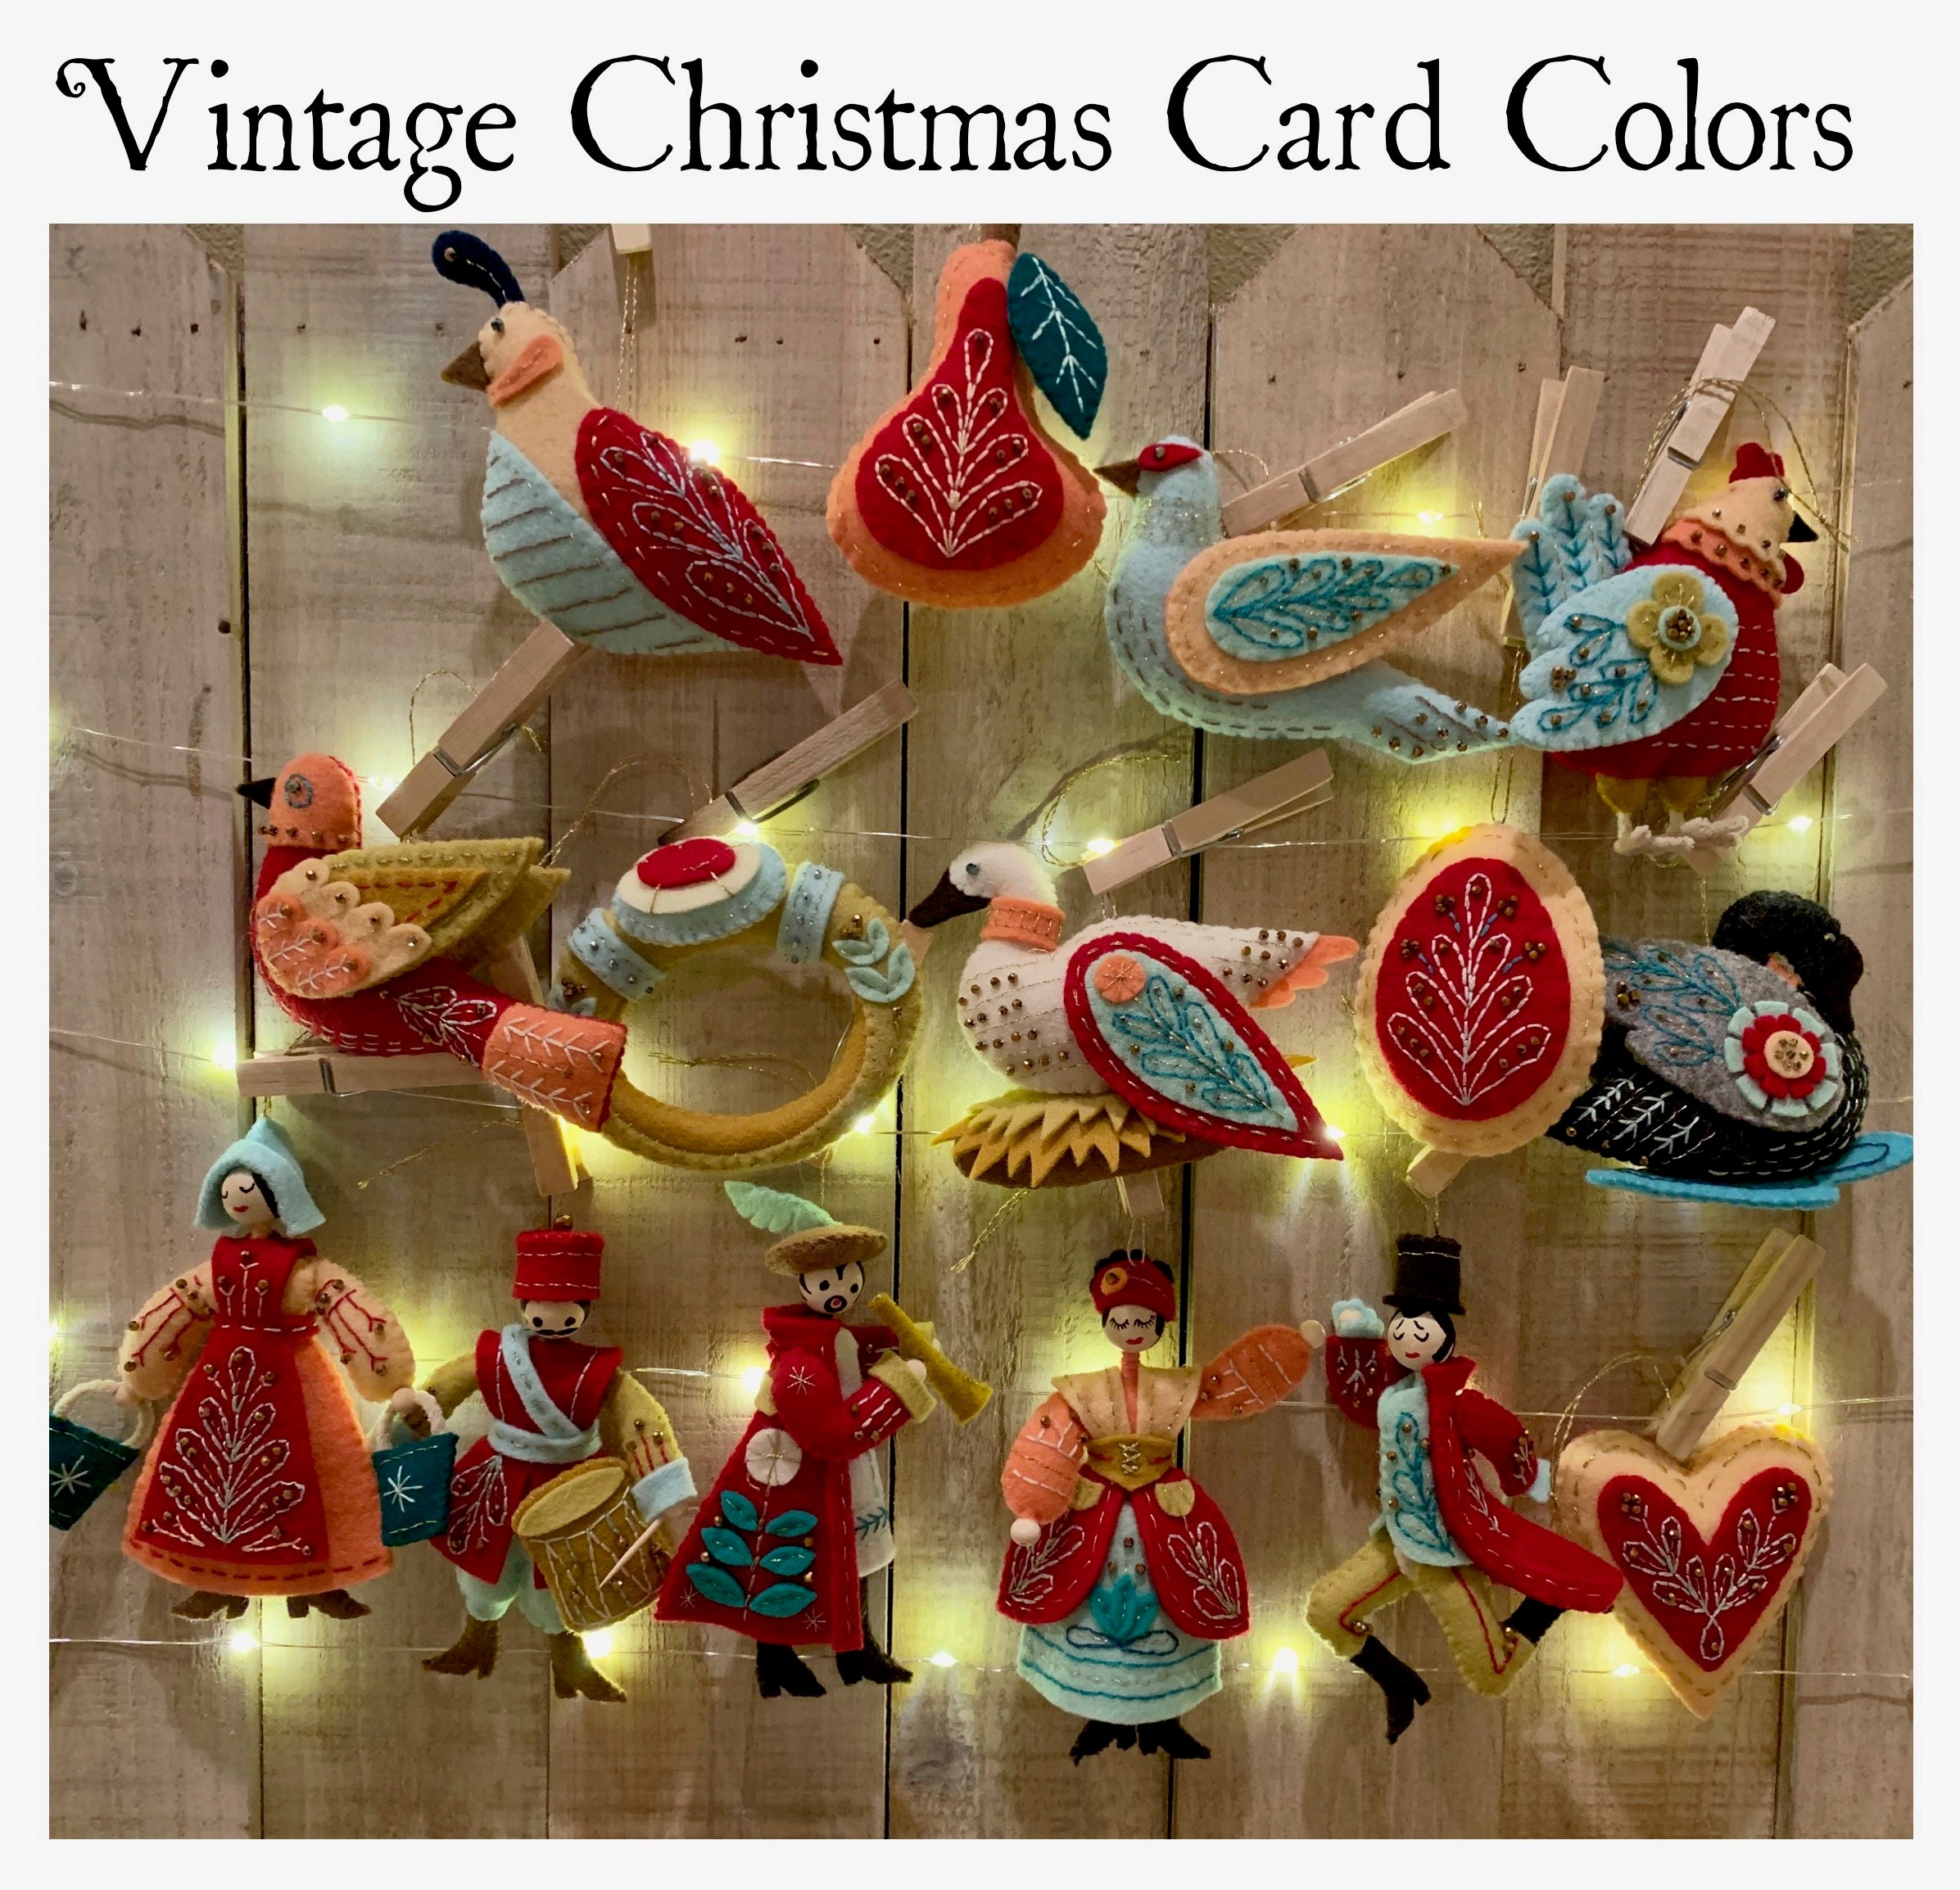 12 Days of Christmas Felt Ornaments Book - Stitched Modern